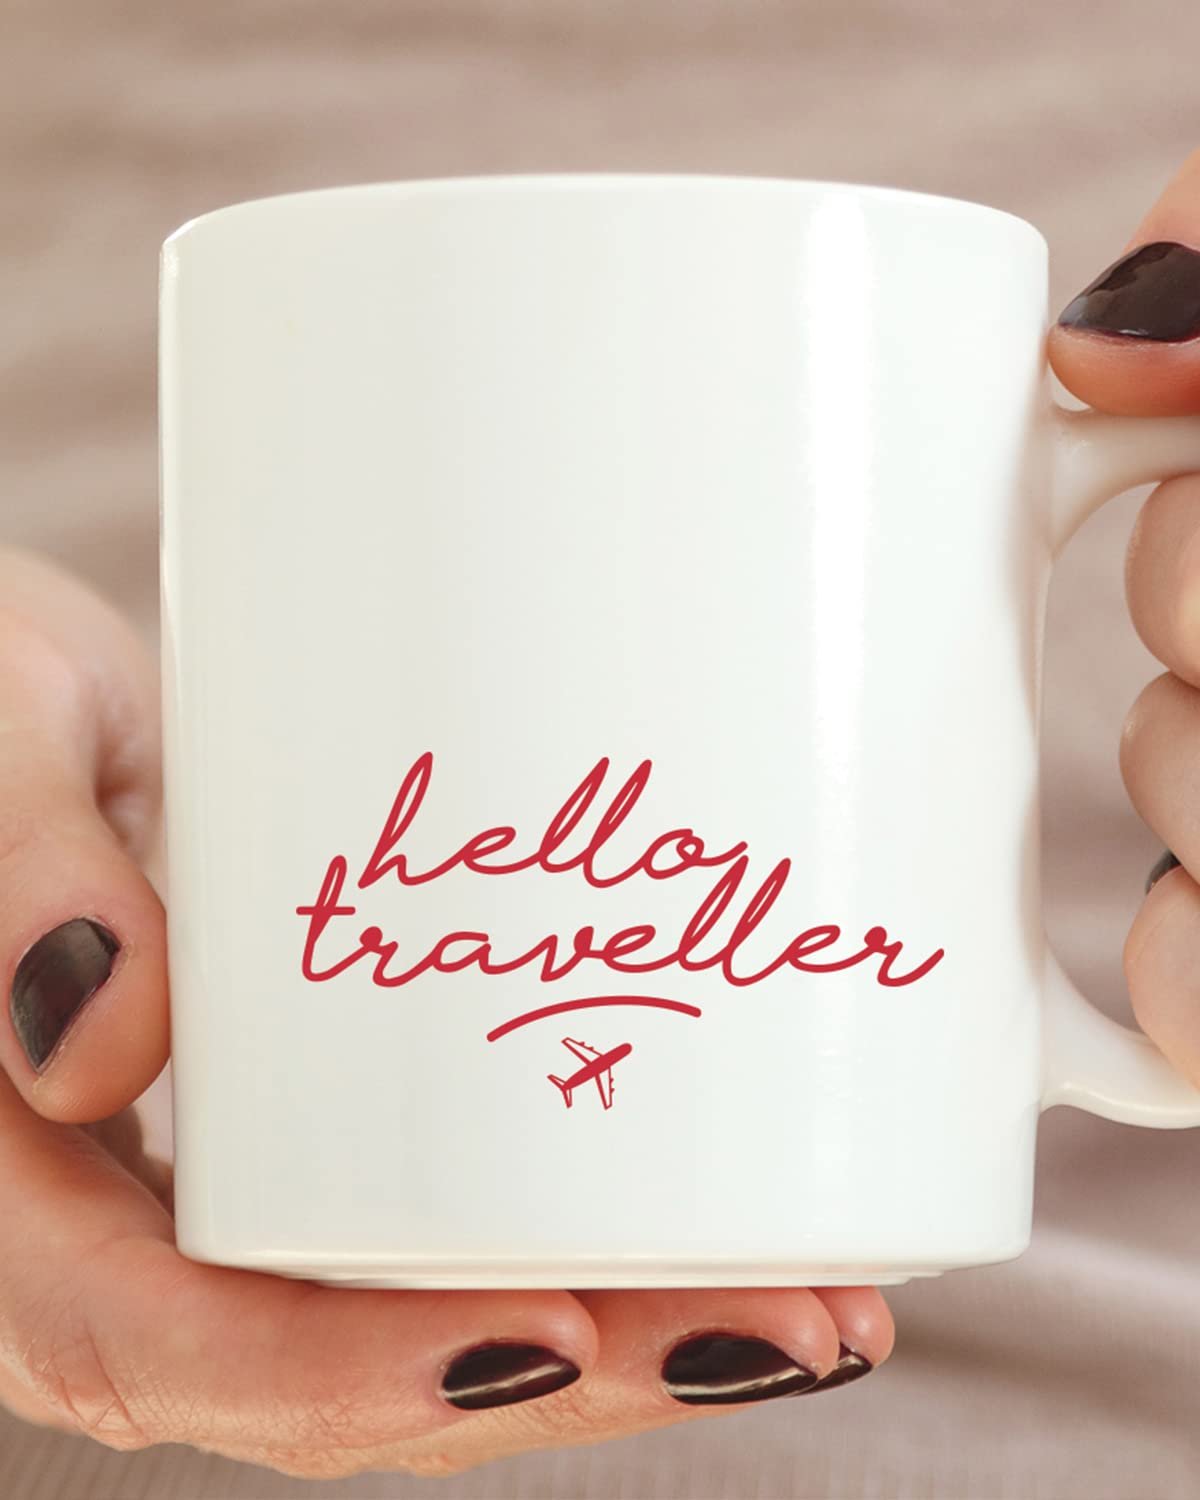 Hello Traveller Coffee Mug - Birthday Gift, Motivational Mug, Printed with Inspiring Quotes, Positivity Mug, Inspirational Gift for Him & Her, Best Friend Gift, Gifts for Her, Cheer Up Gift